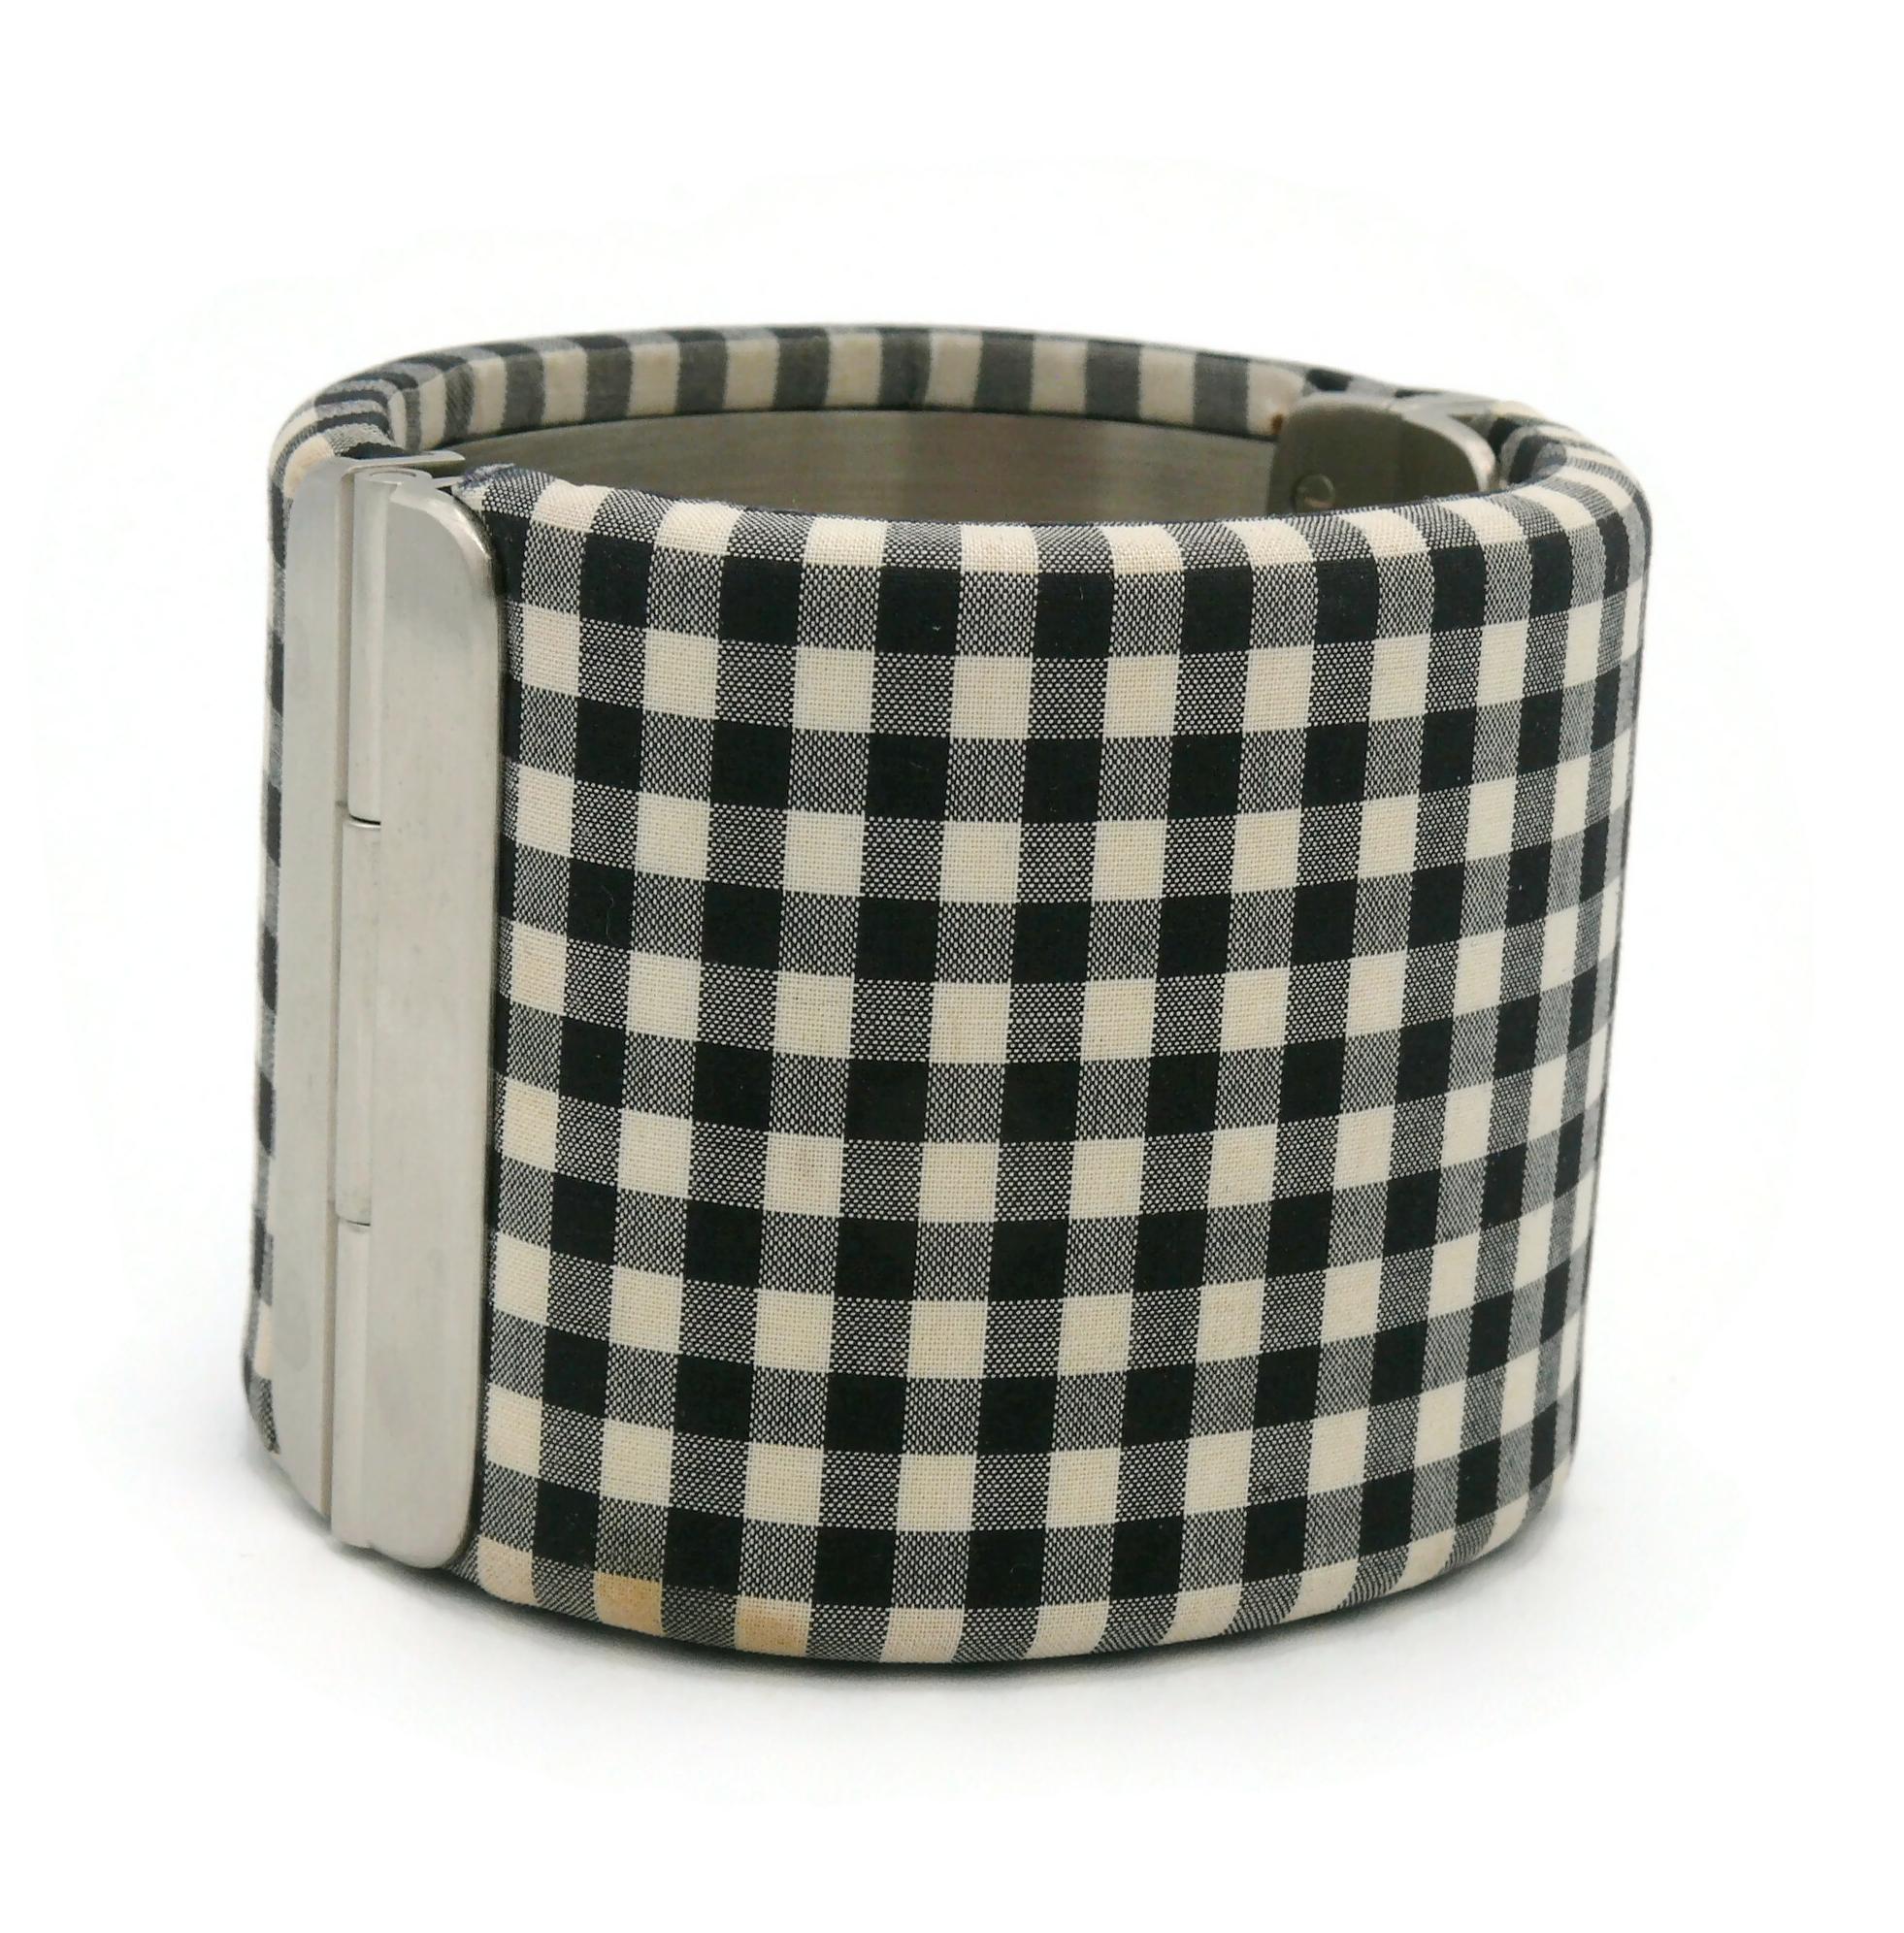 Women's CHANEL Black and White Gingham Vichy Print Cuff Bracelet, Resort Collection 2011 For Sale